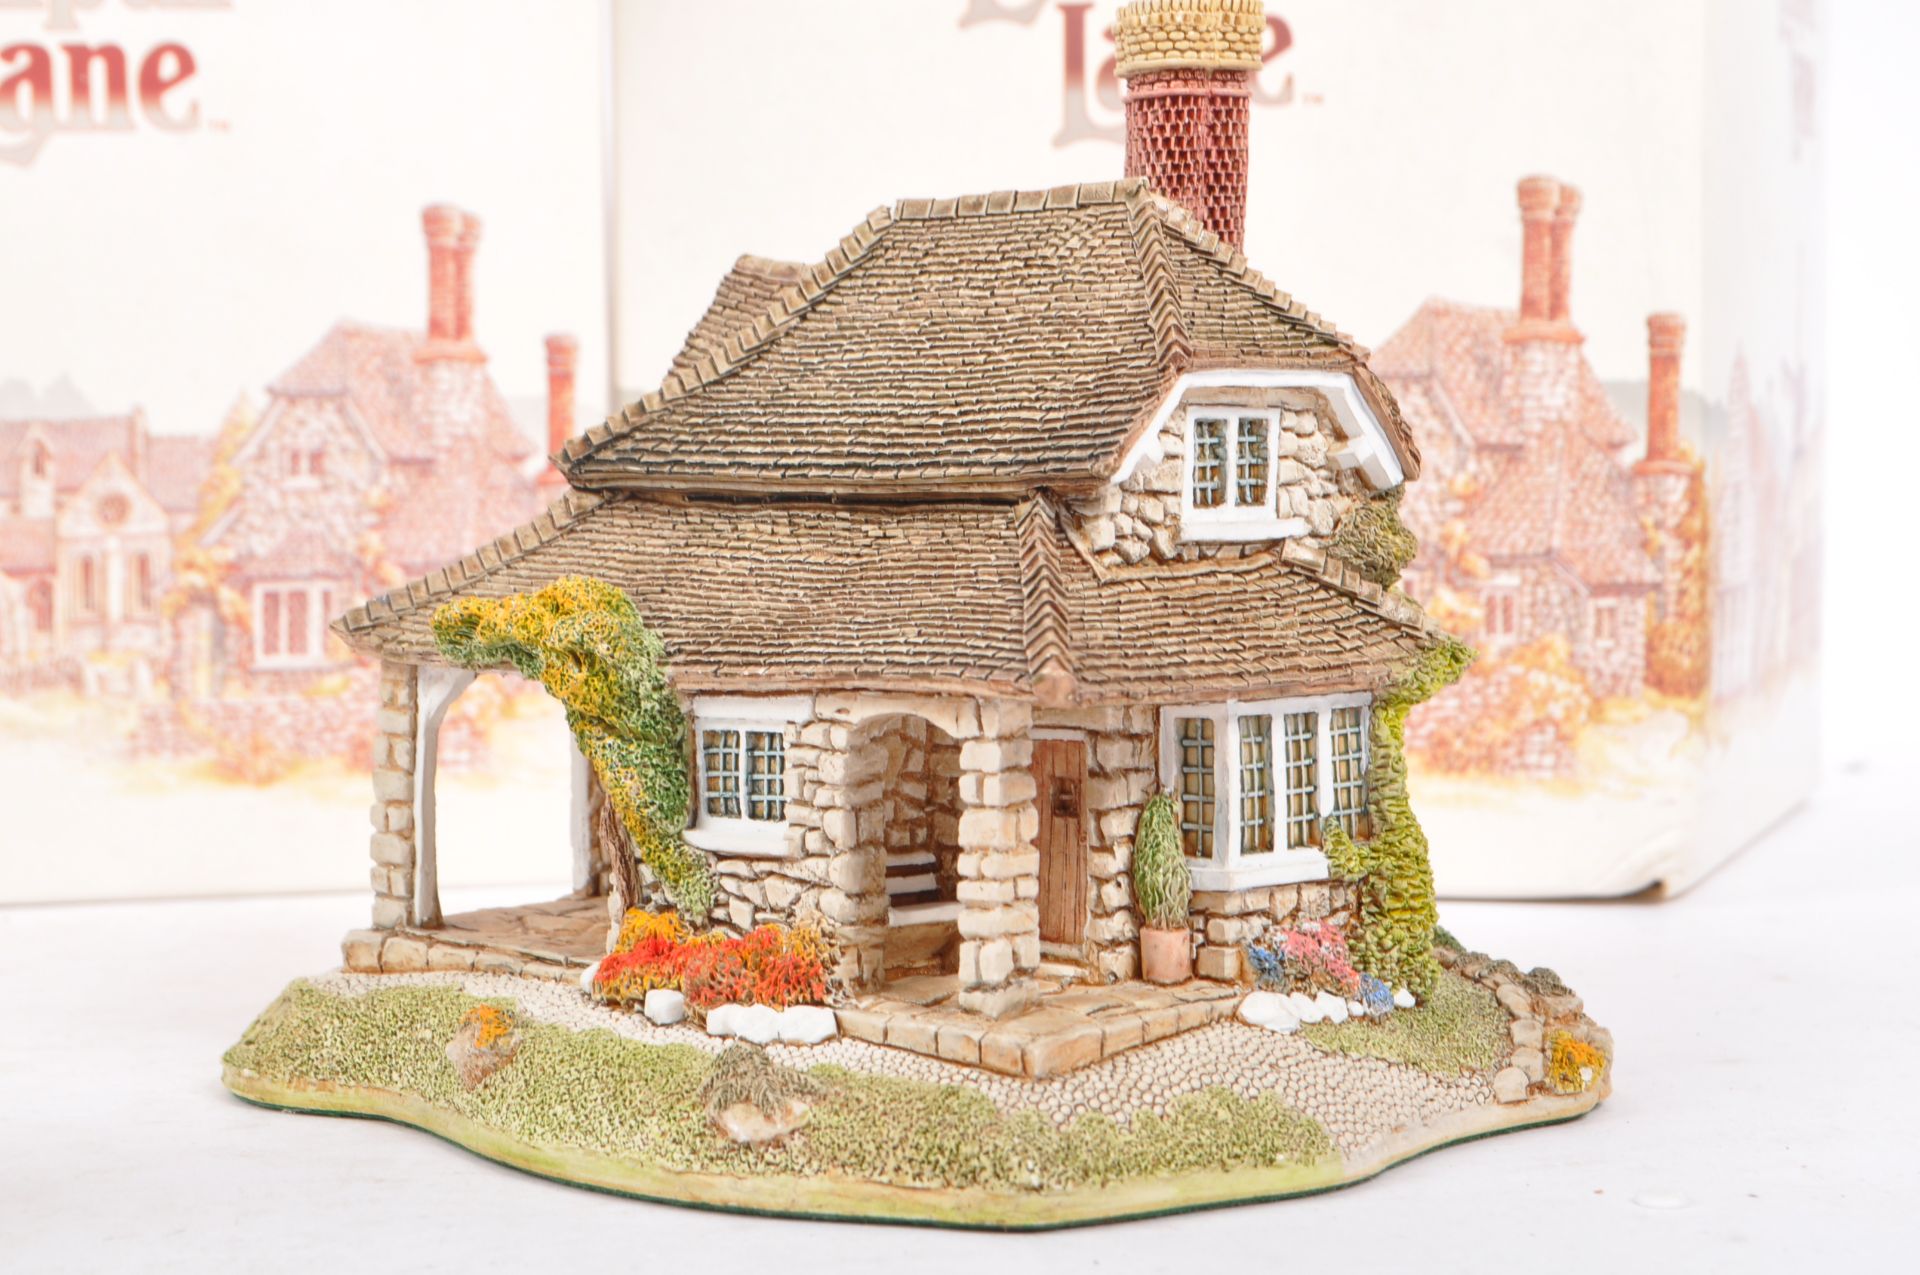 LILLIPUT LANE - COLLECTION OF HOUSE / COTTAGE FIGURINES - Image 8 of 15